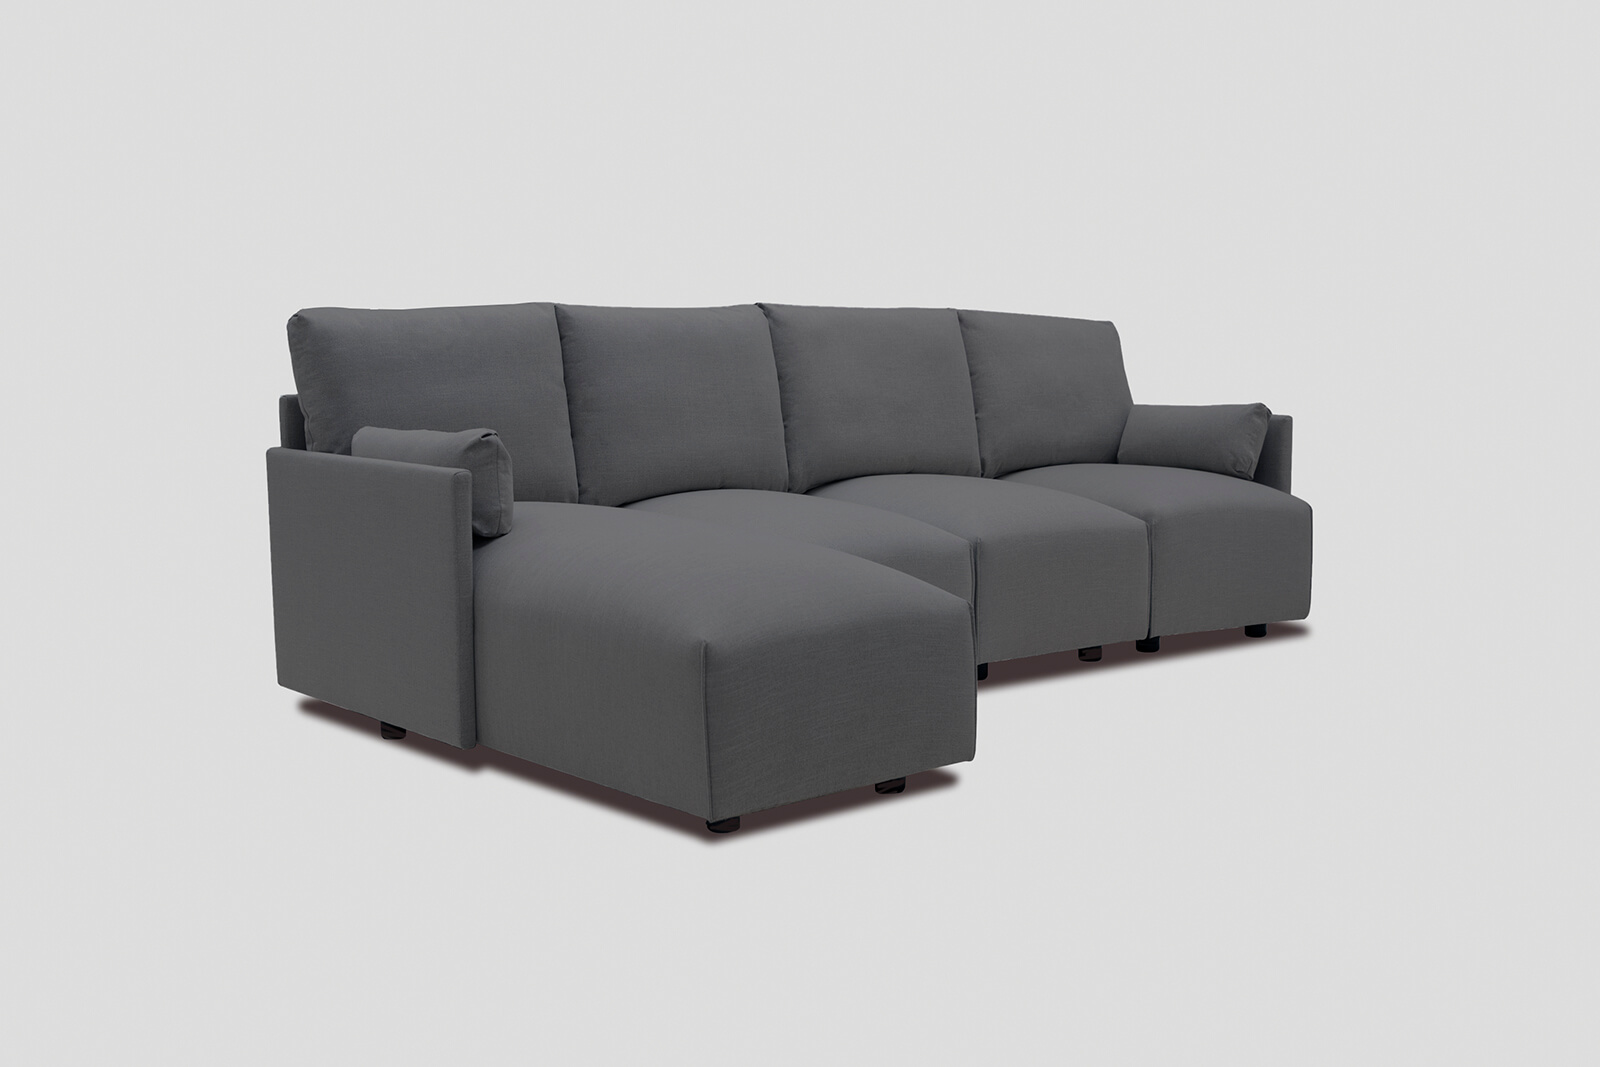 HB04-large-chaise-sofa-seal-3q-left